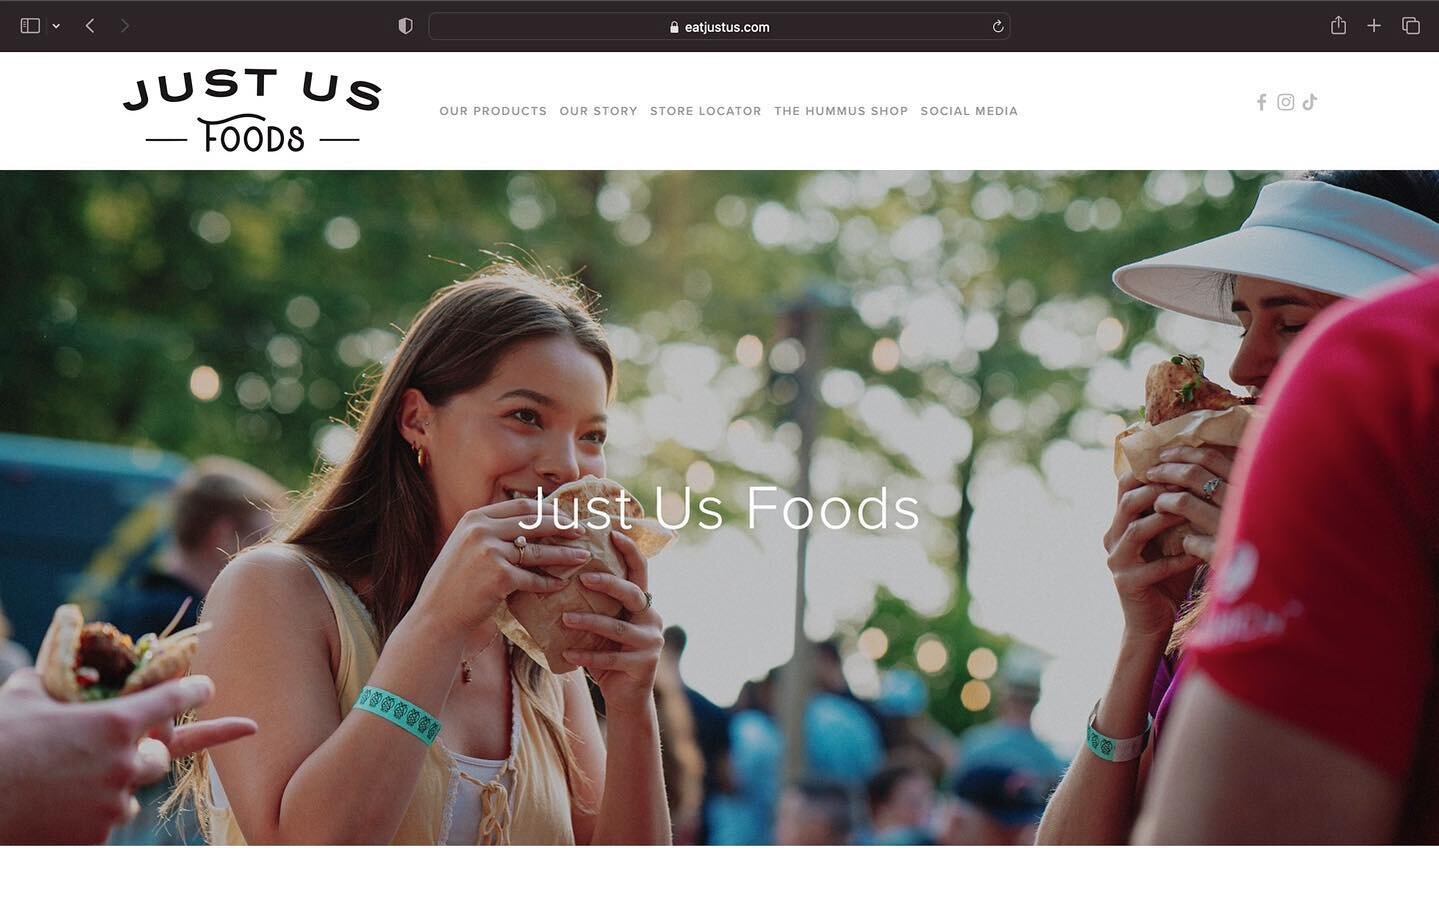 Our brand new Just Us Foods website is now live at www.eatjustus.com ! Check it out to see our latest products, find out about our story, learn about our food truck &lsquo;The Hummus Shop&rsquo;, or to locate the nearest store stocking our products!